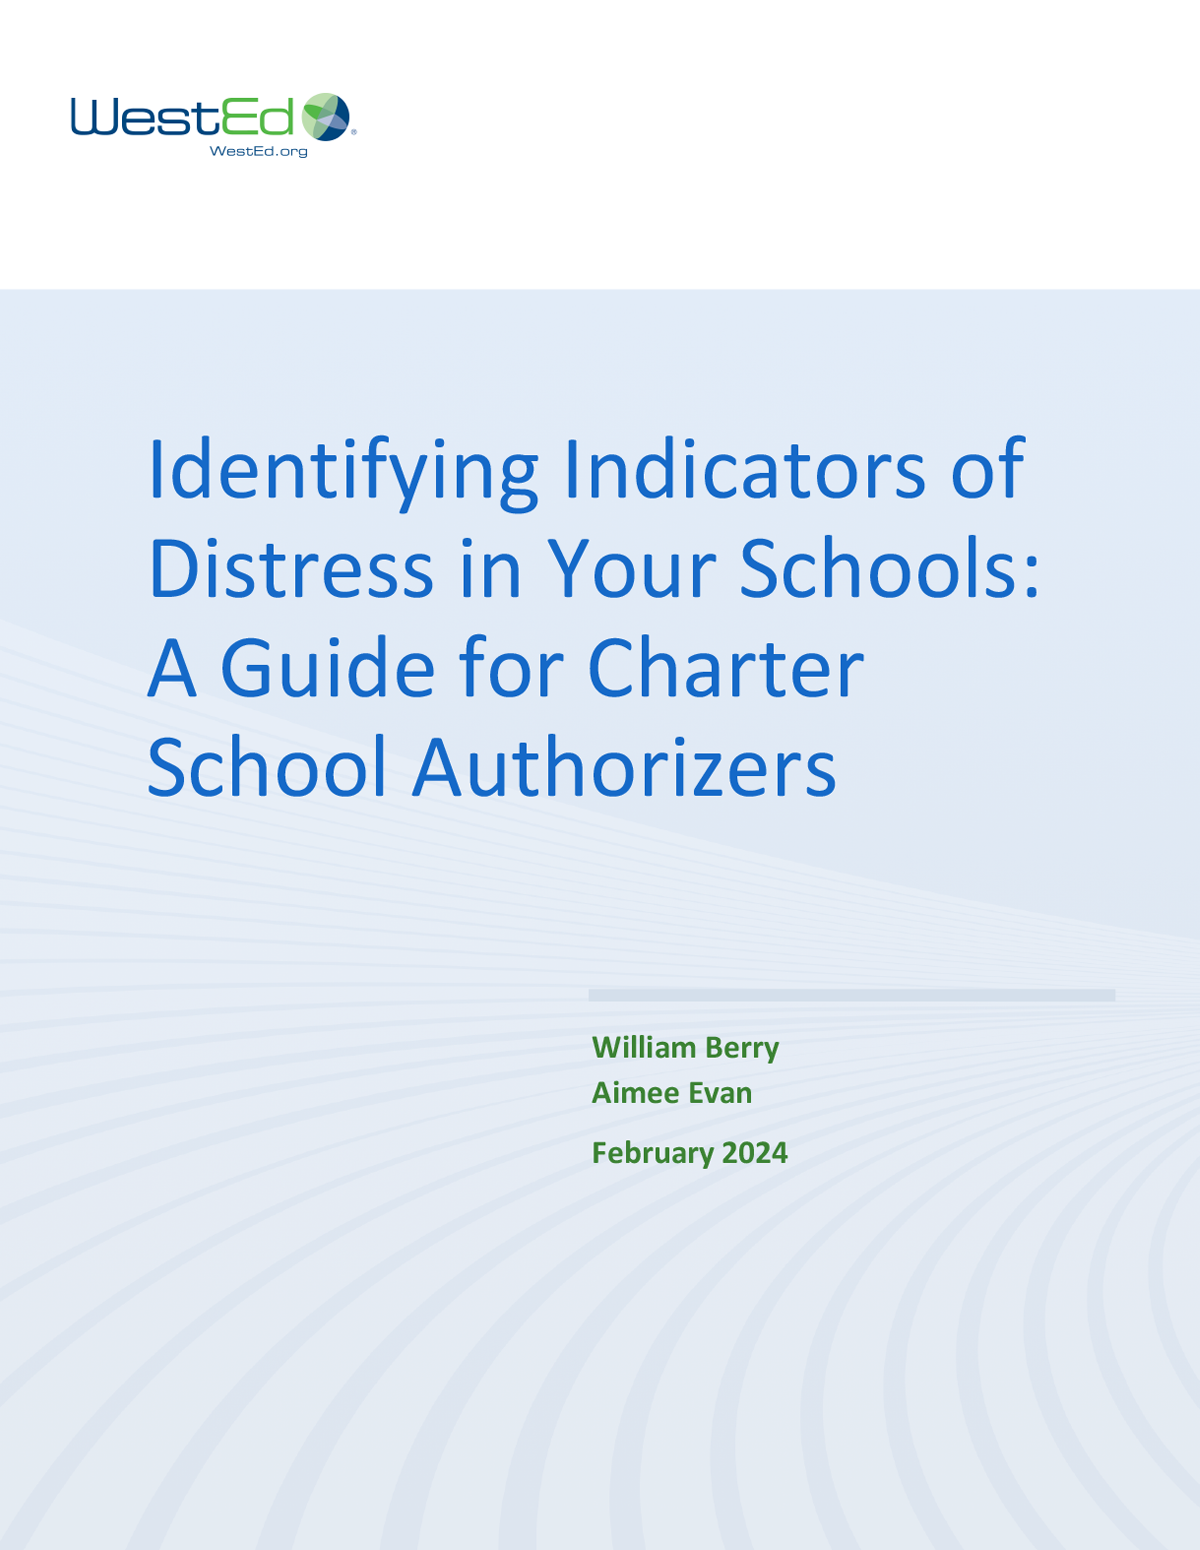 Identifying Indicators of Distress in Your Schools: A Guide for Charter School Authorizers by William Berry and Aimee Evan February 2024